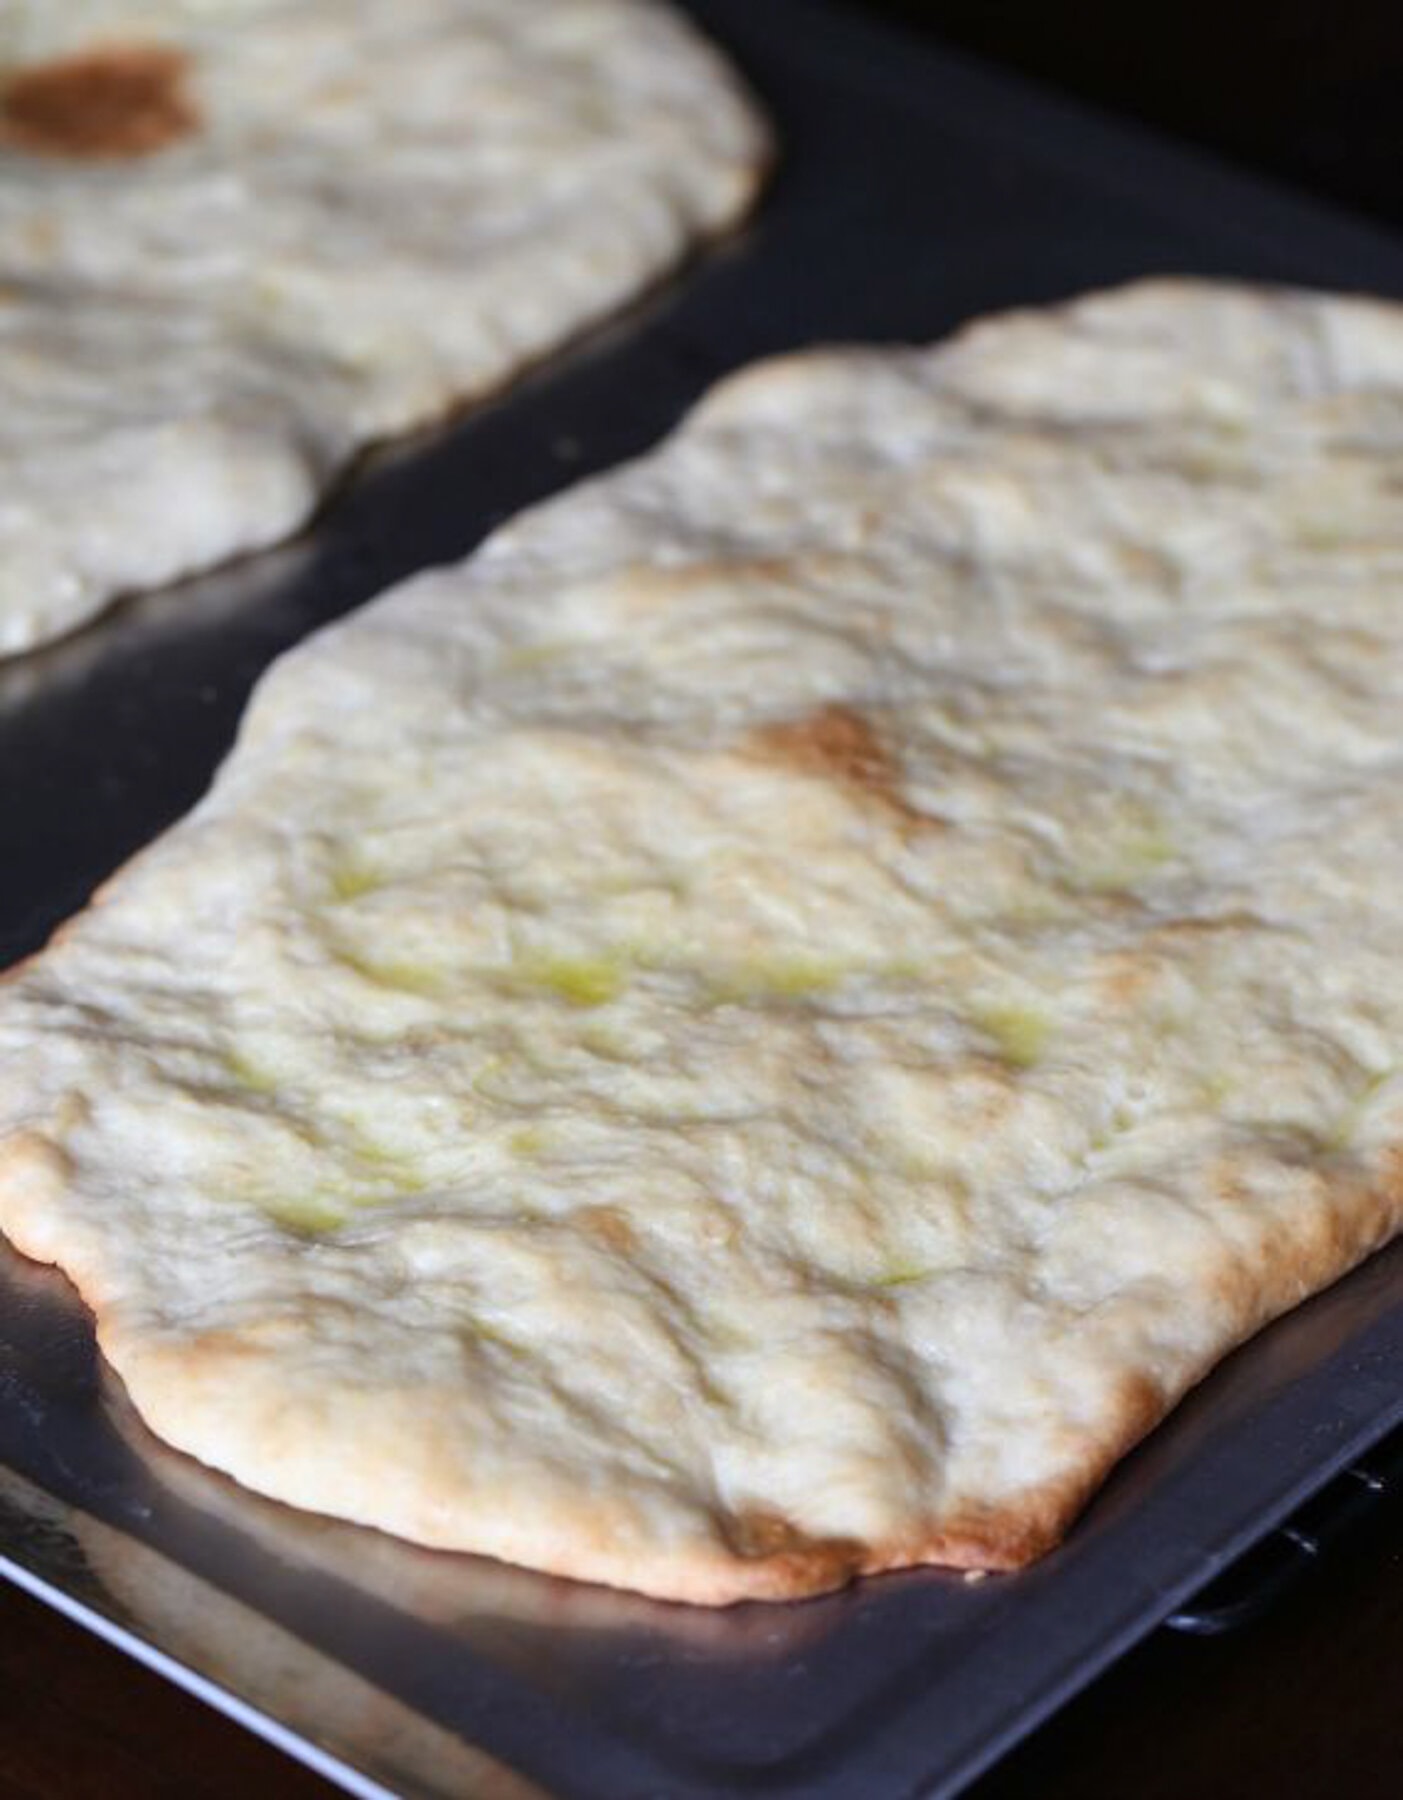 Baked Pizza crust on a sheet pan